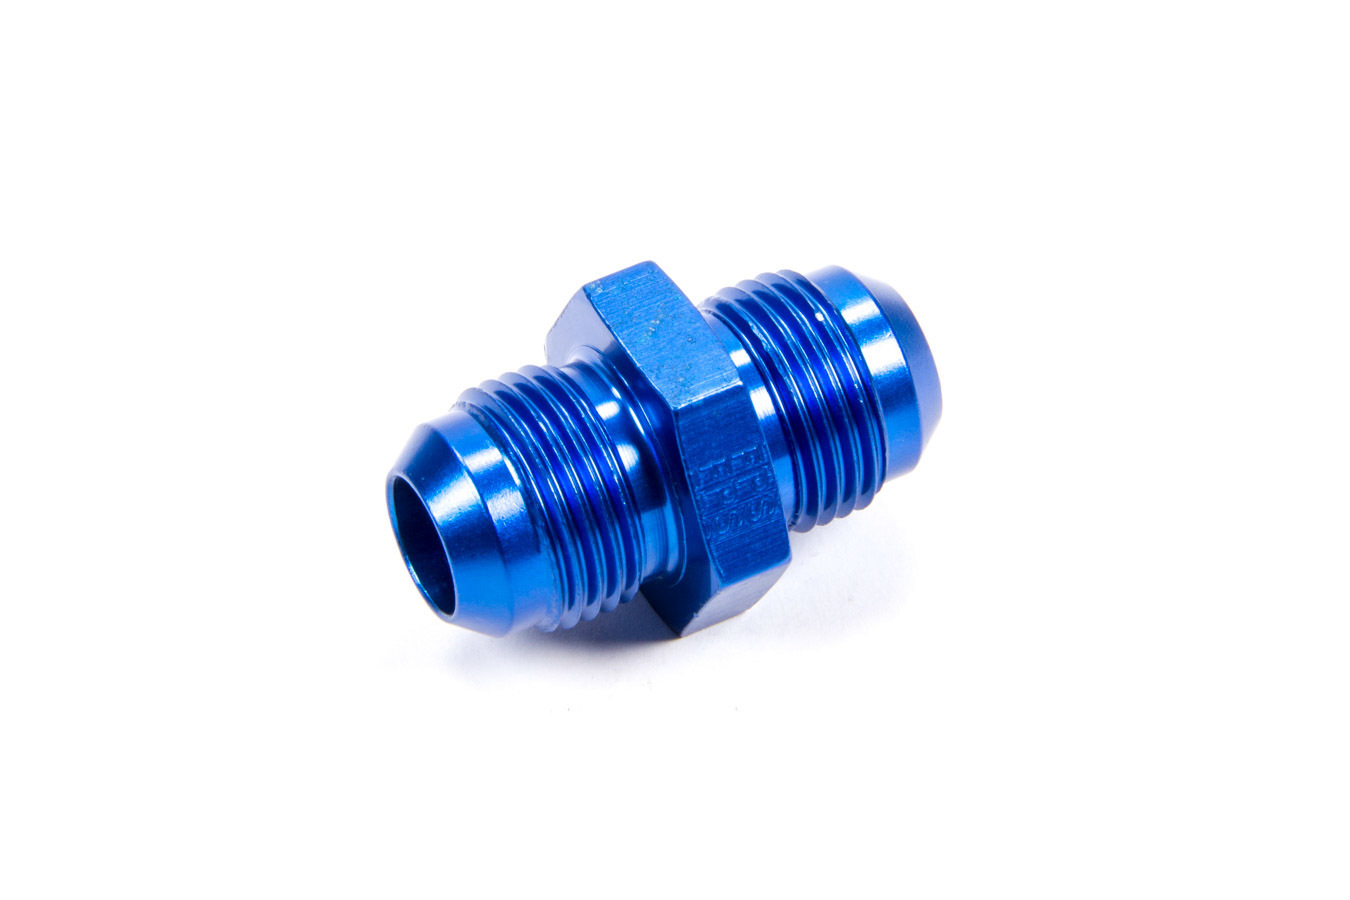 Fragola 481510 Fitting, Adapter, Straight, 10 AN Male to 10 AN Male, Aluminum, Blue Anodized, Each